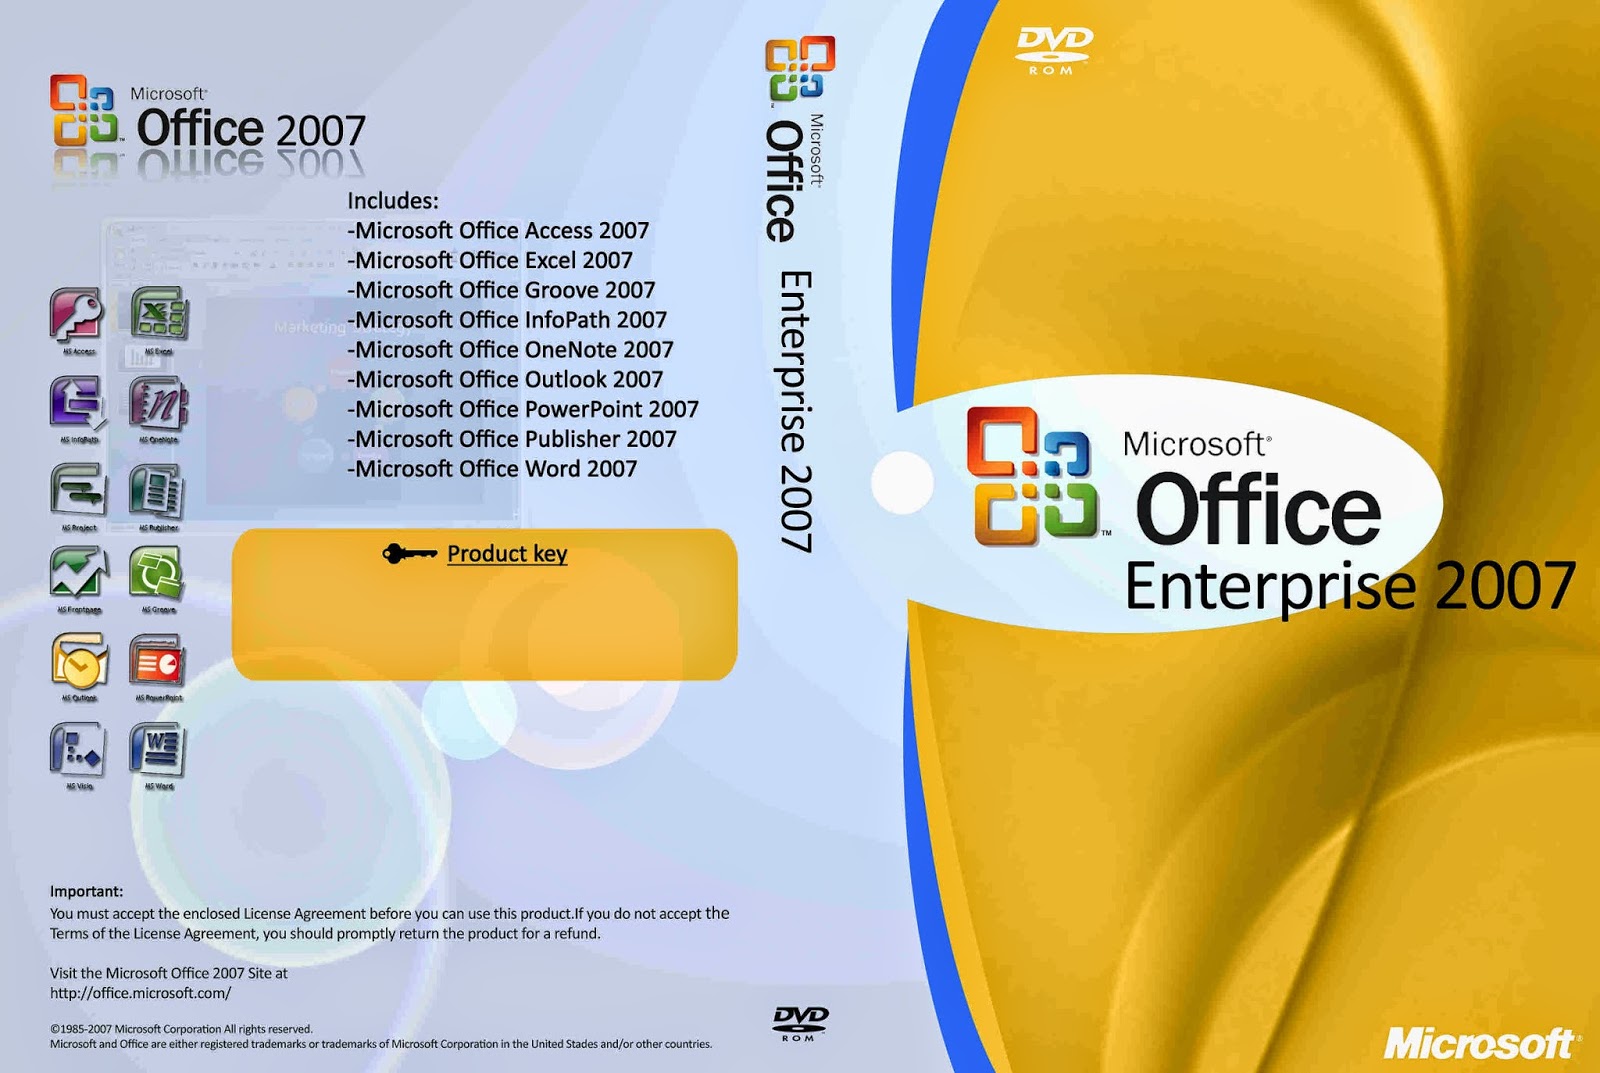 microsoft office professional 2007 download